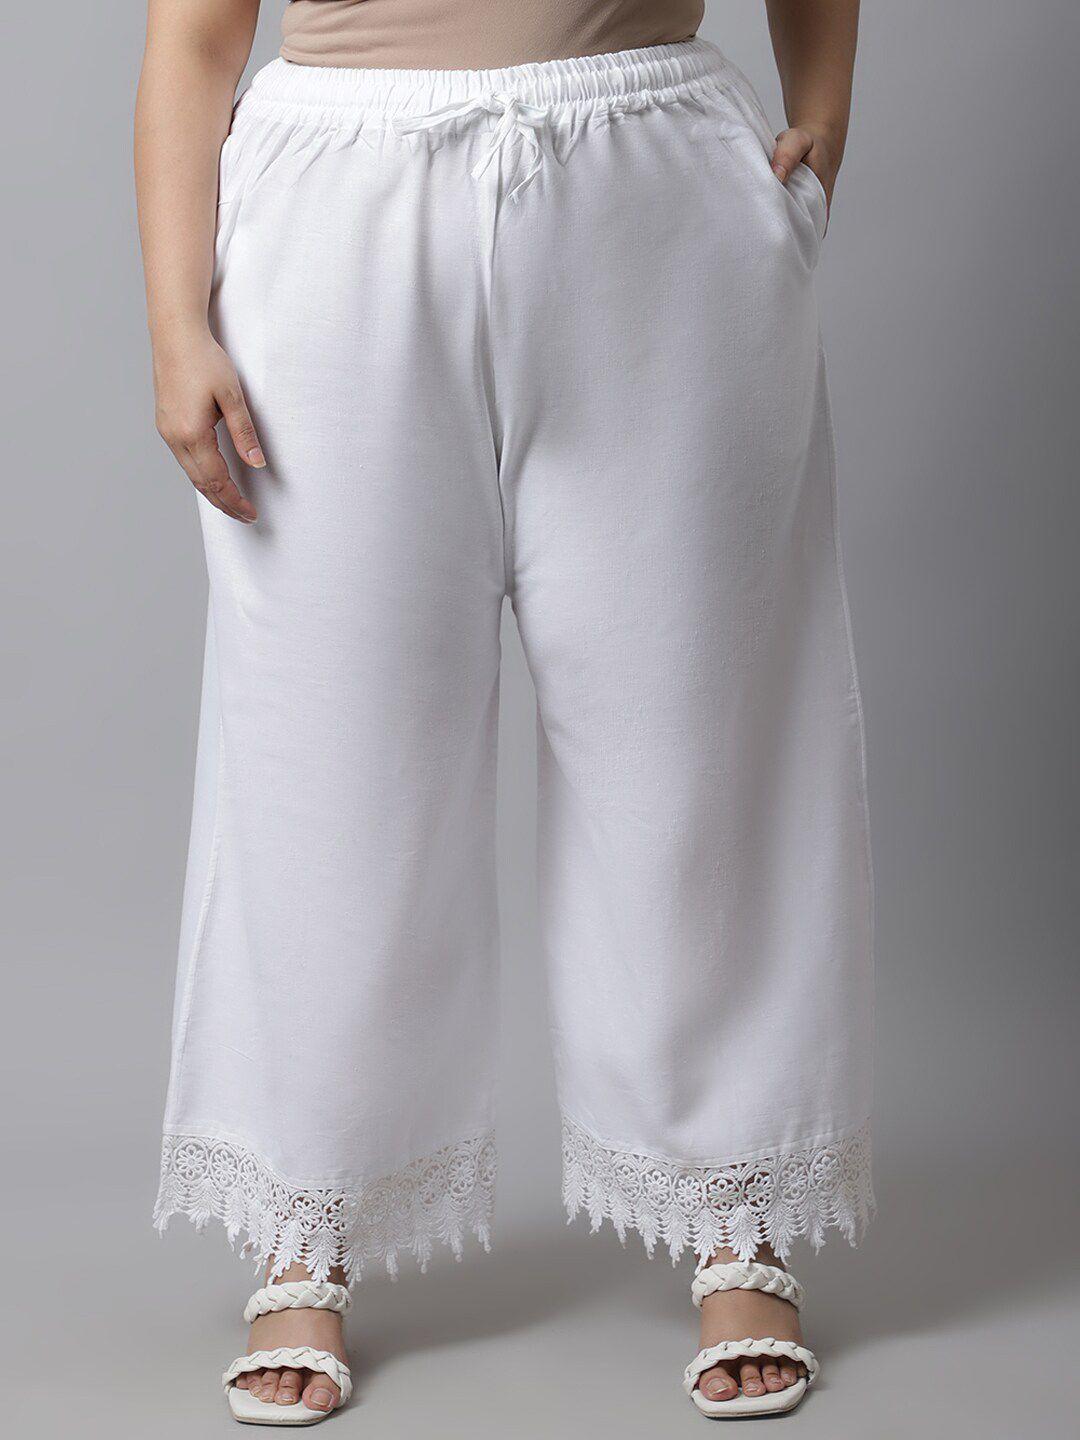 tag 7 women plus size white solid linen ethnic palazzos